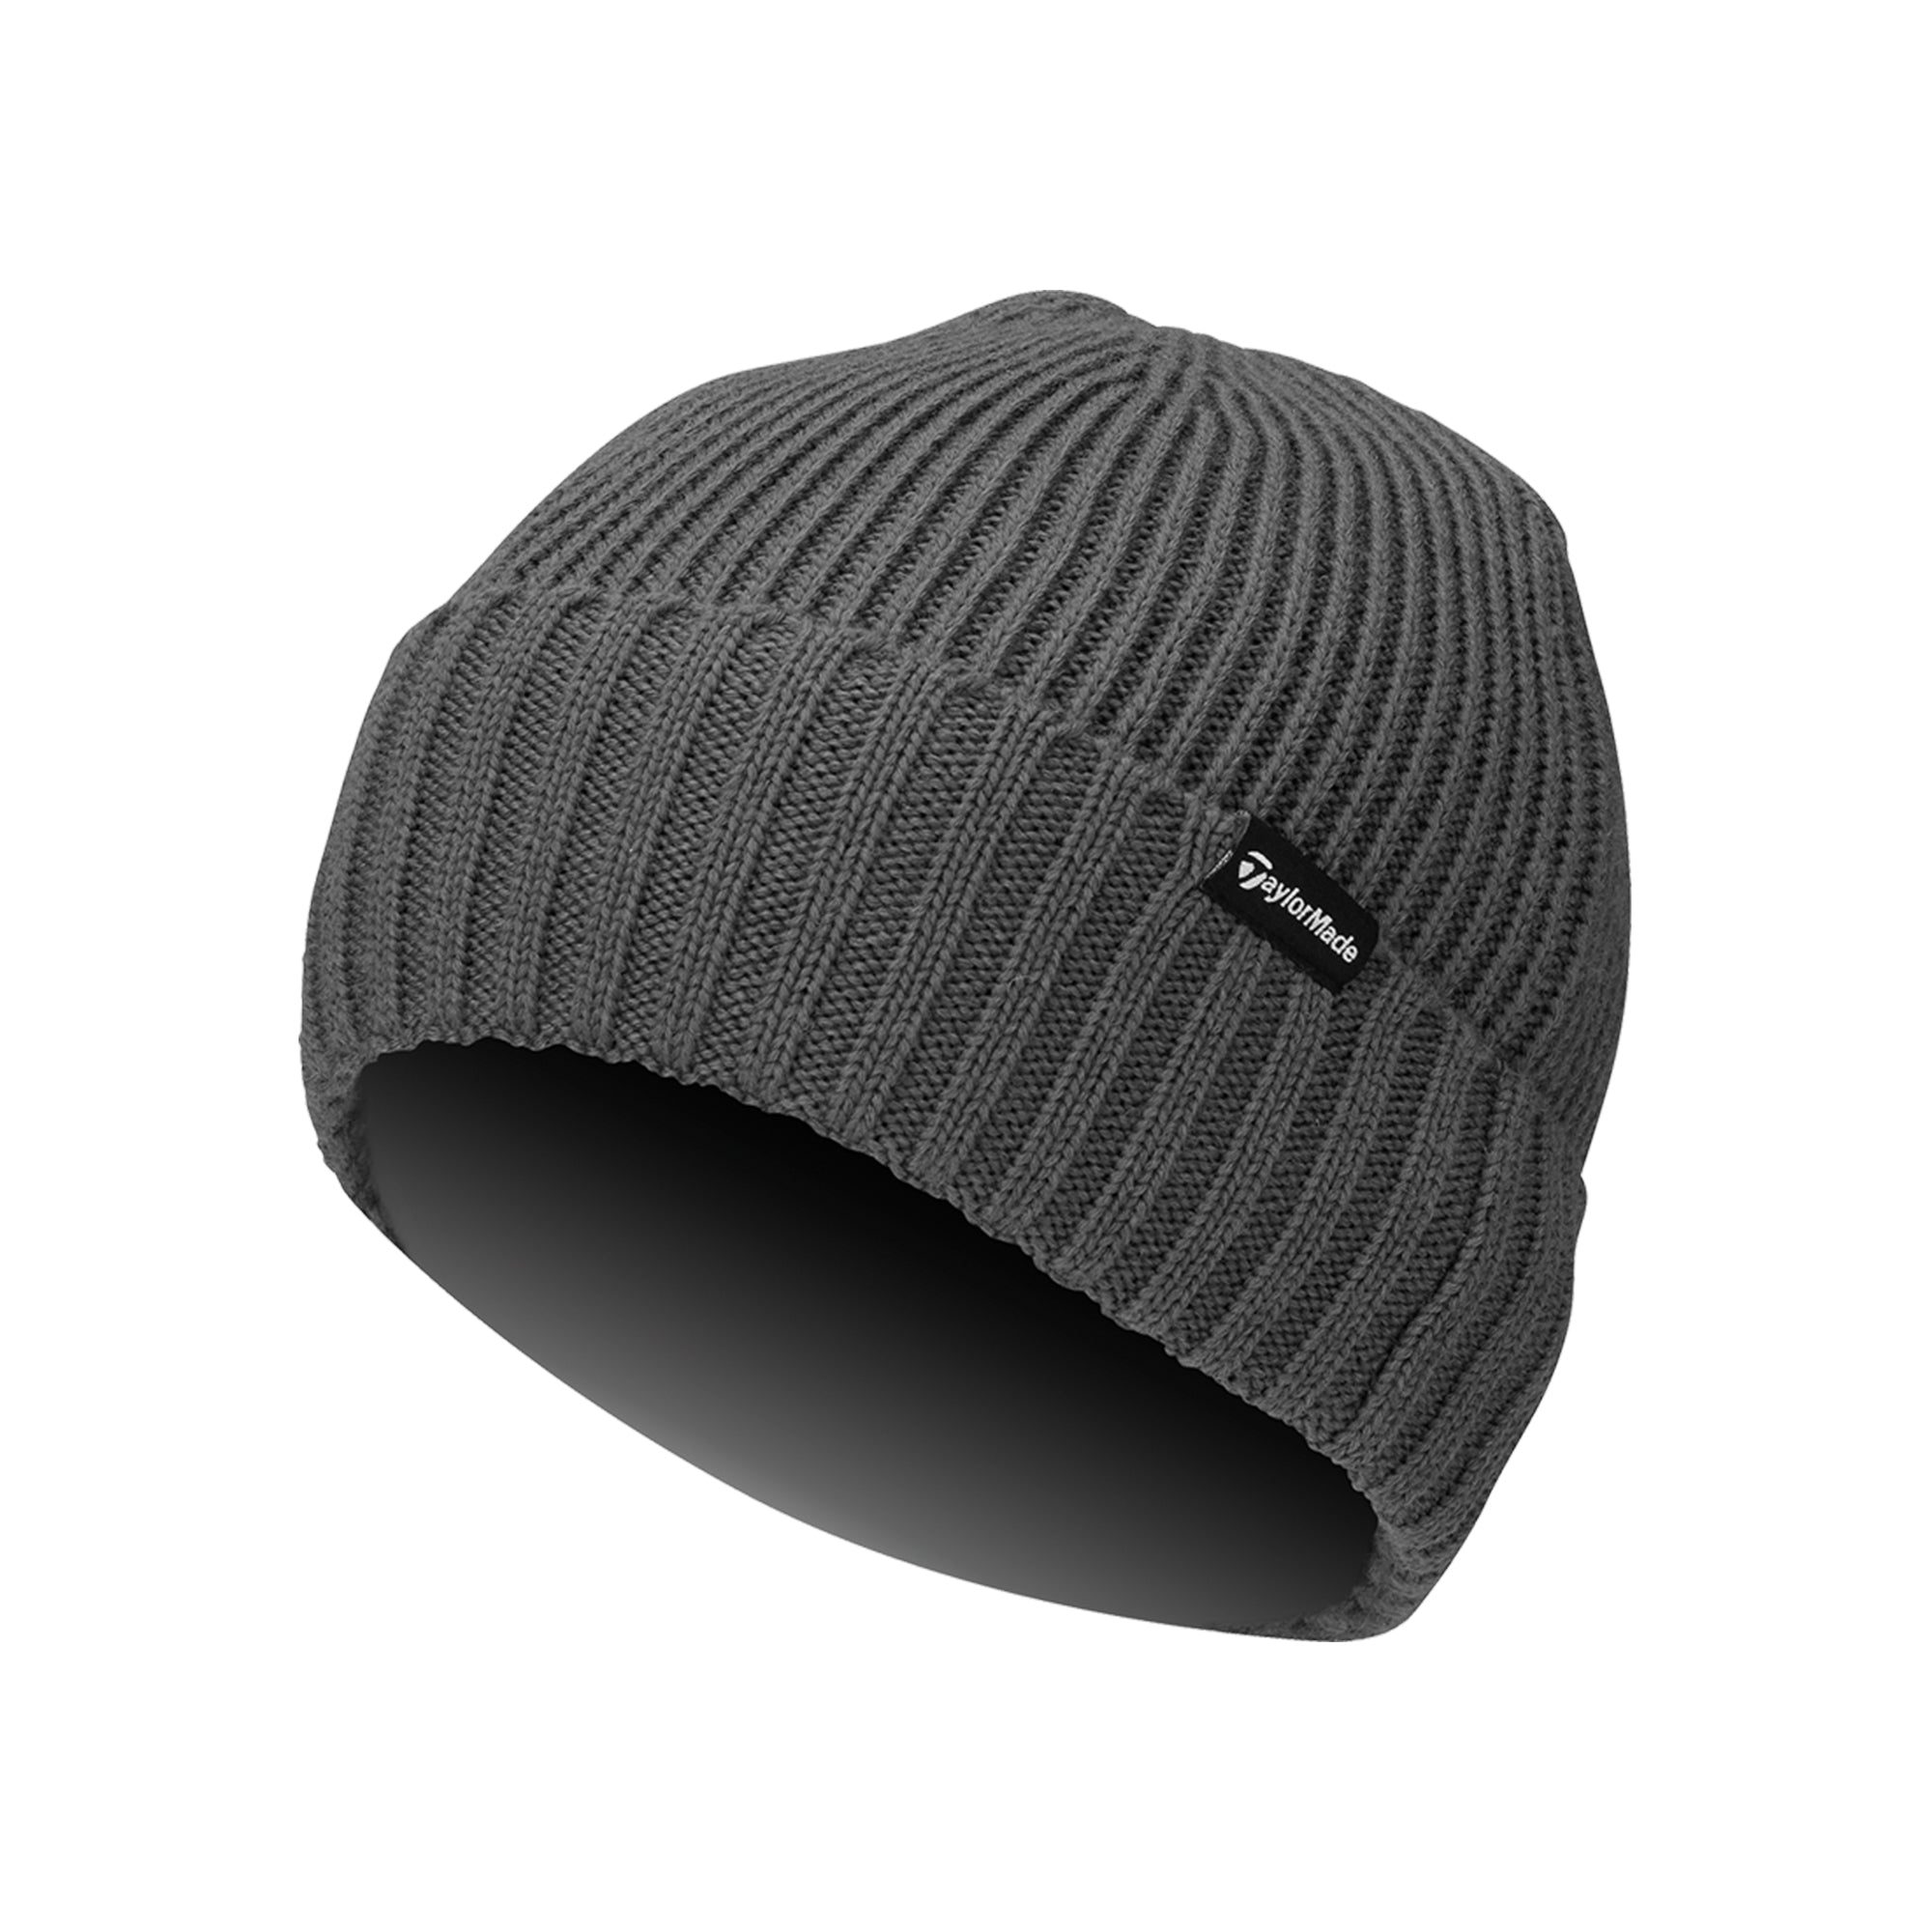 taylormade-golf-beanie-hat-v97814-charcoal-heather